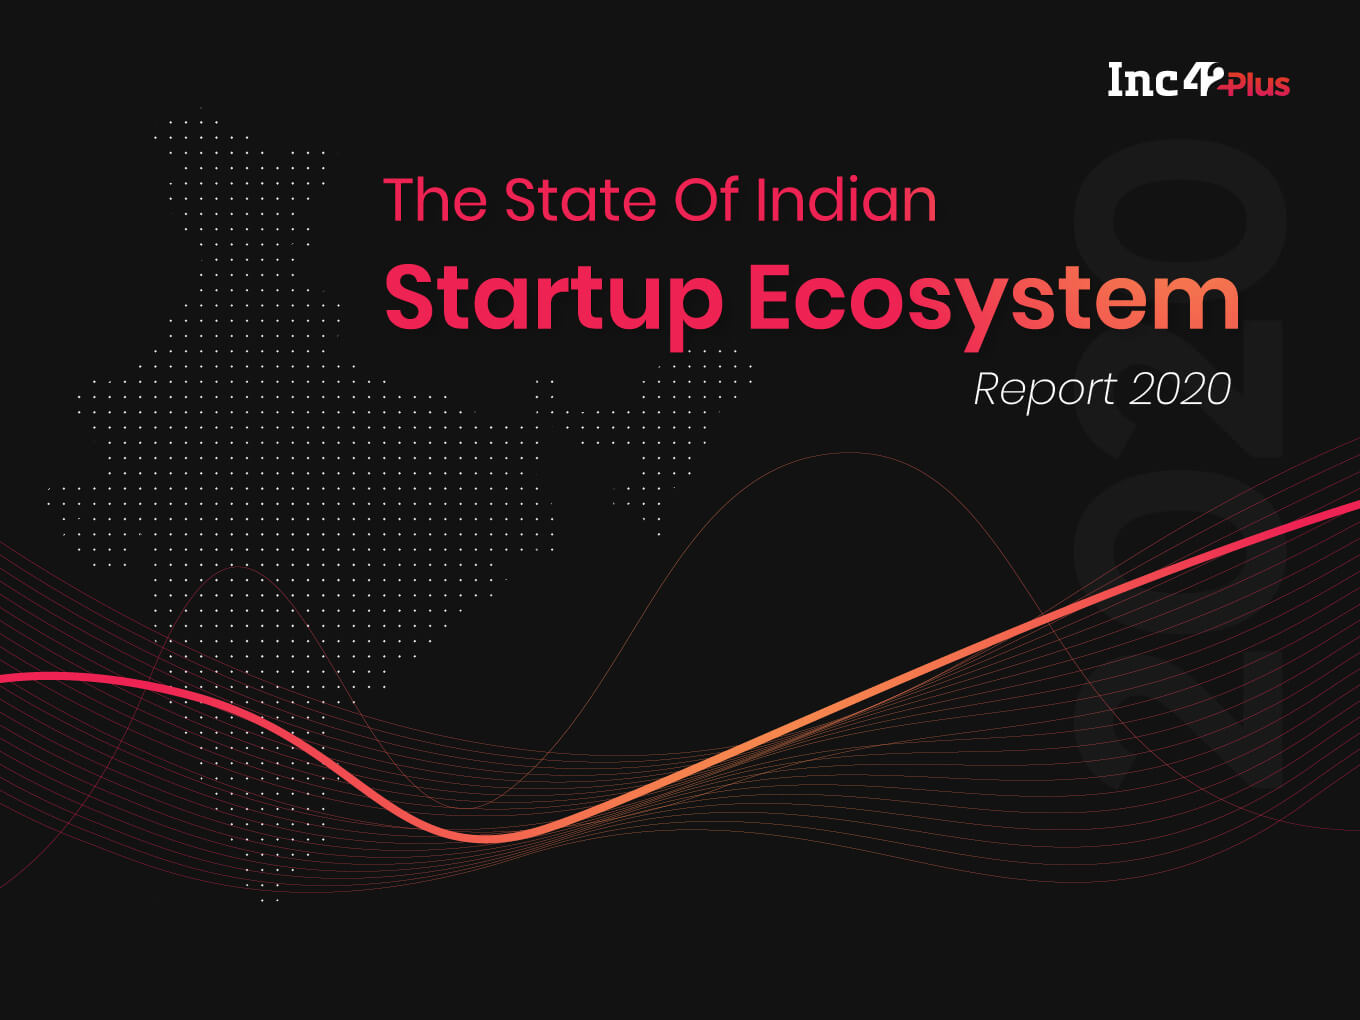 Presenting The State Of Indian Startup Ecosystem Report 2020